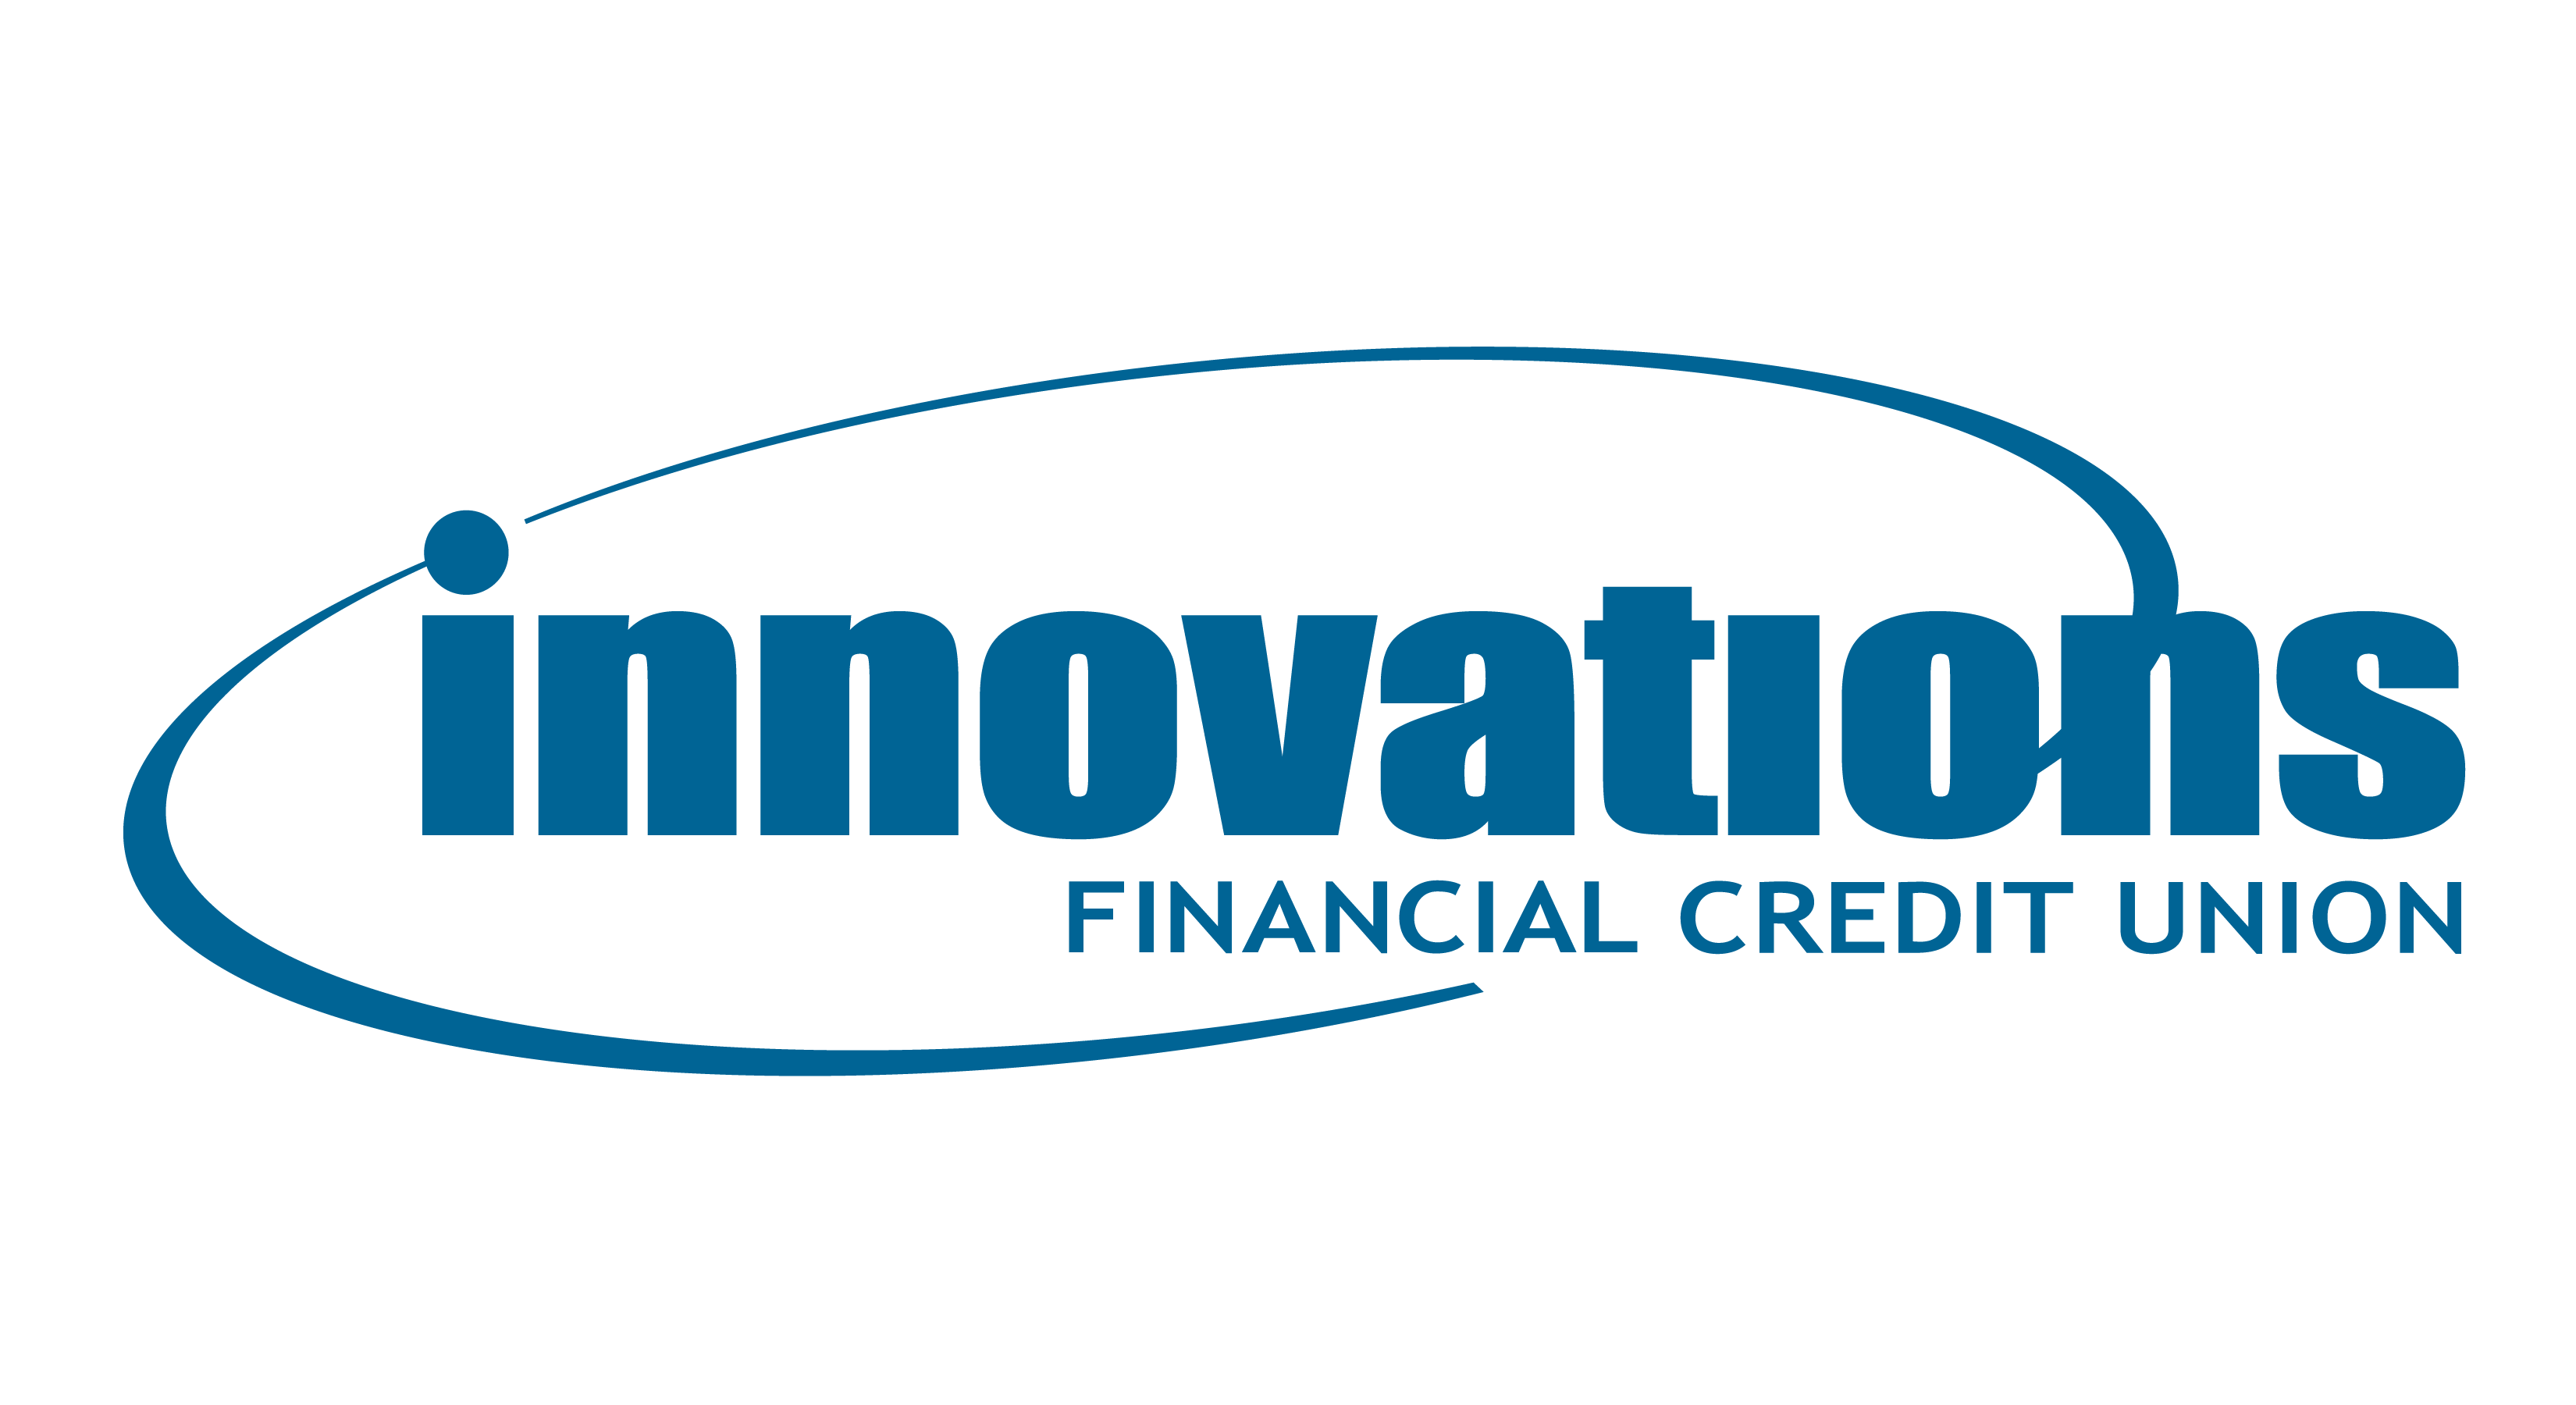 Innovations Financial Credit Union announces intention to purchase First National Bank Northwest Florida